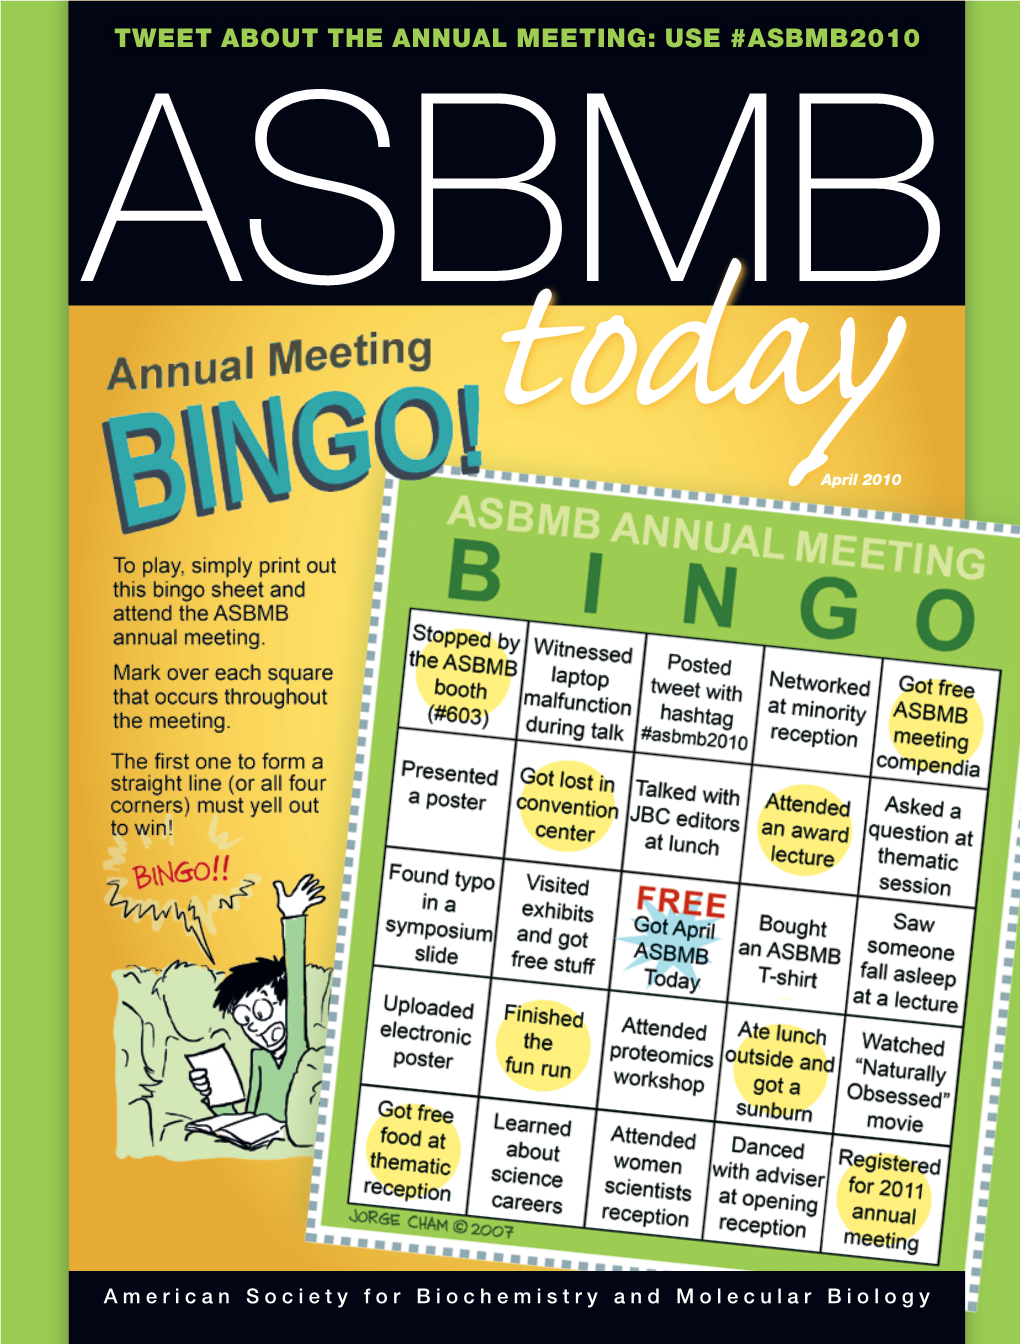 Tweet About the Annual Meeting: Use #ASBMB2010